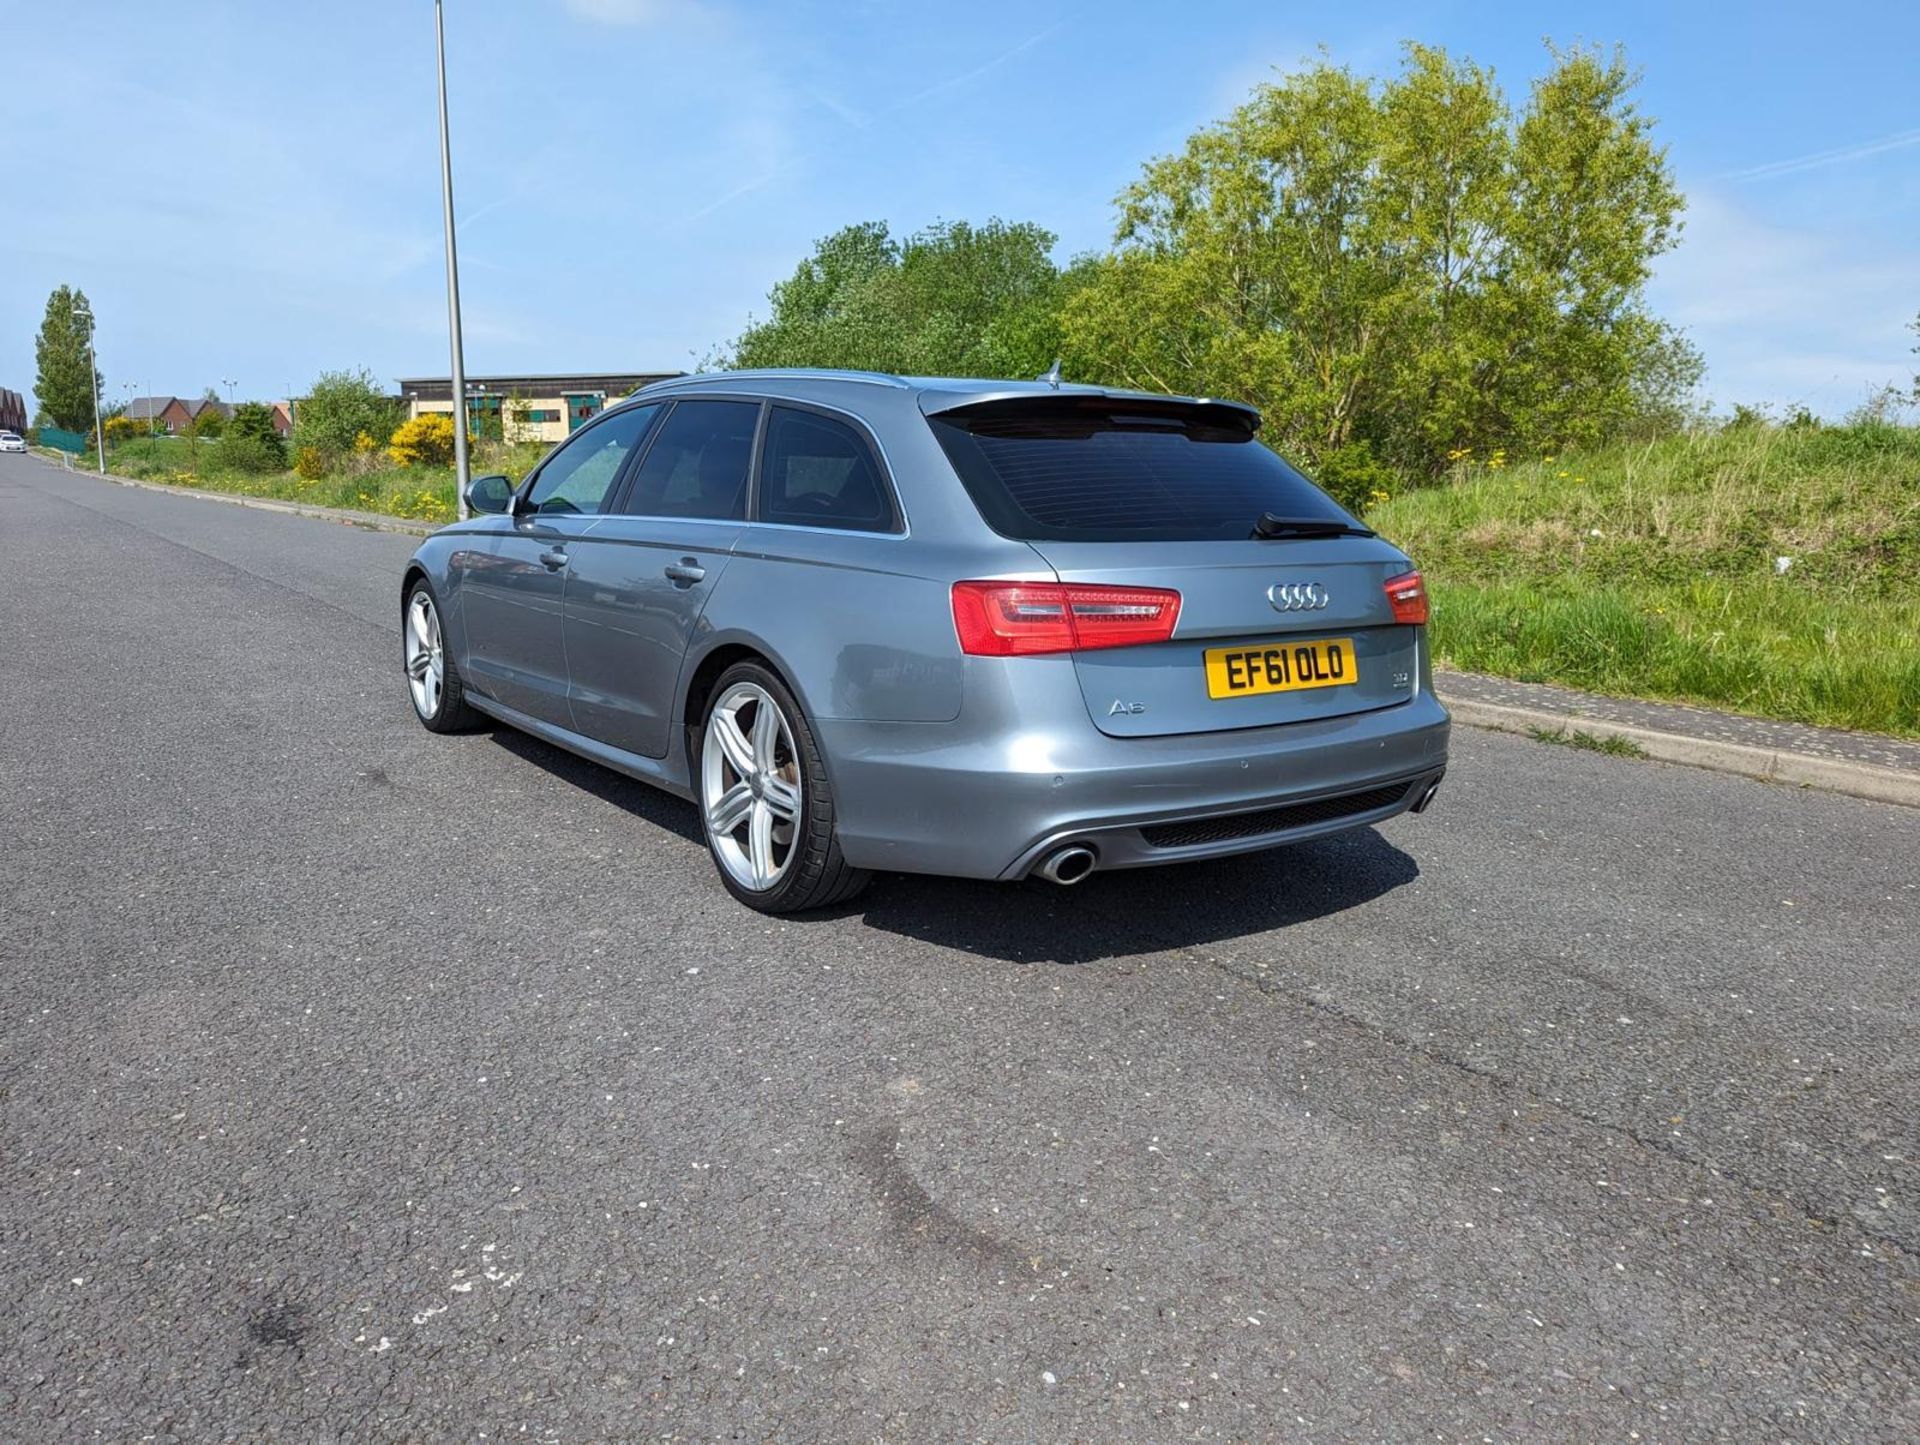 2012/61 REG AUDI A6 S LINE TDI 3.0 DIESEL QUATTRO AUTOMATIC GREY ESTATE, SHOWING 3 FORMER KEEPERS - Image 7 of 49